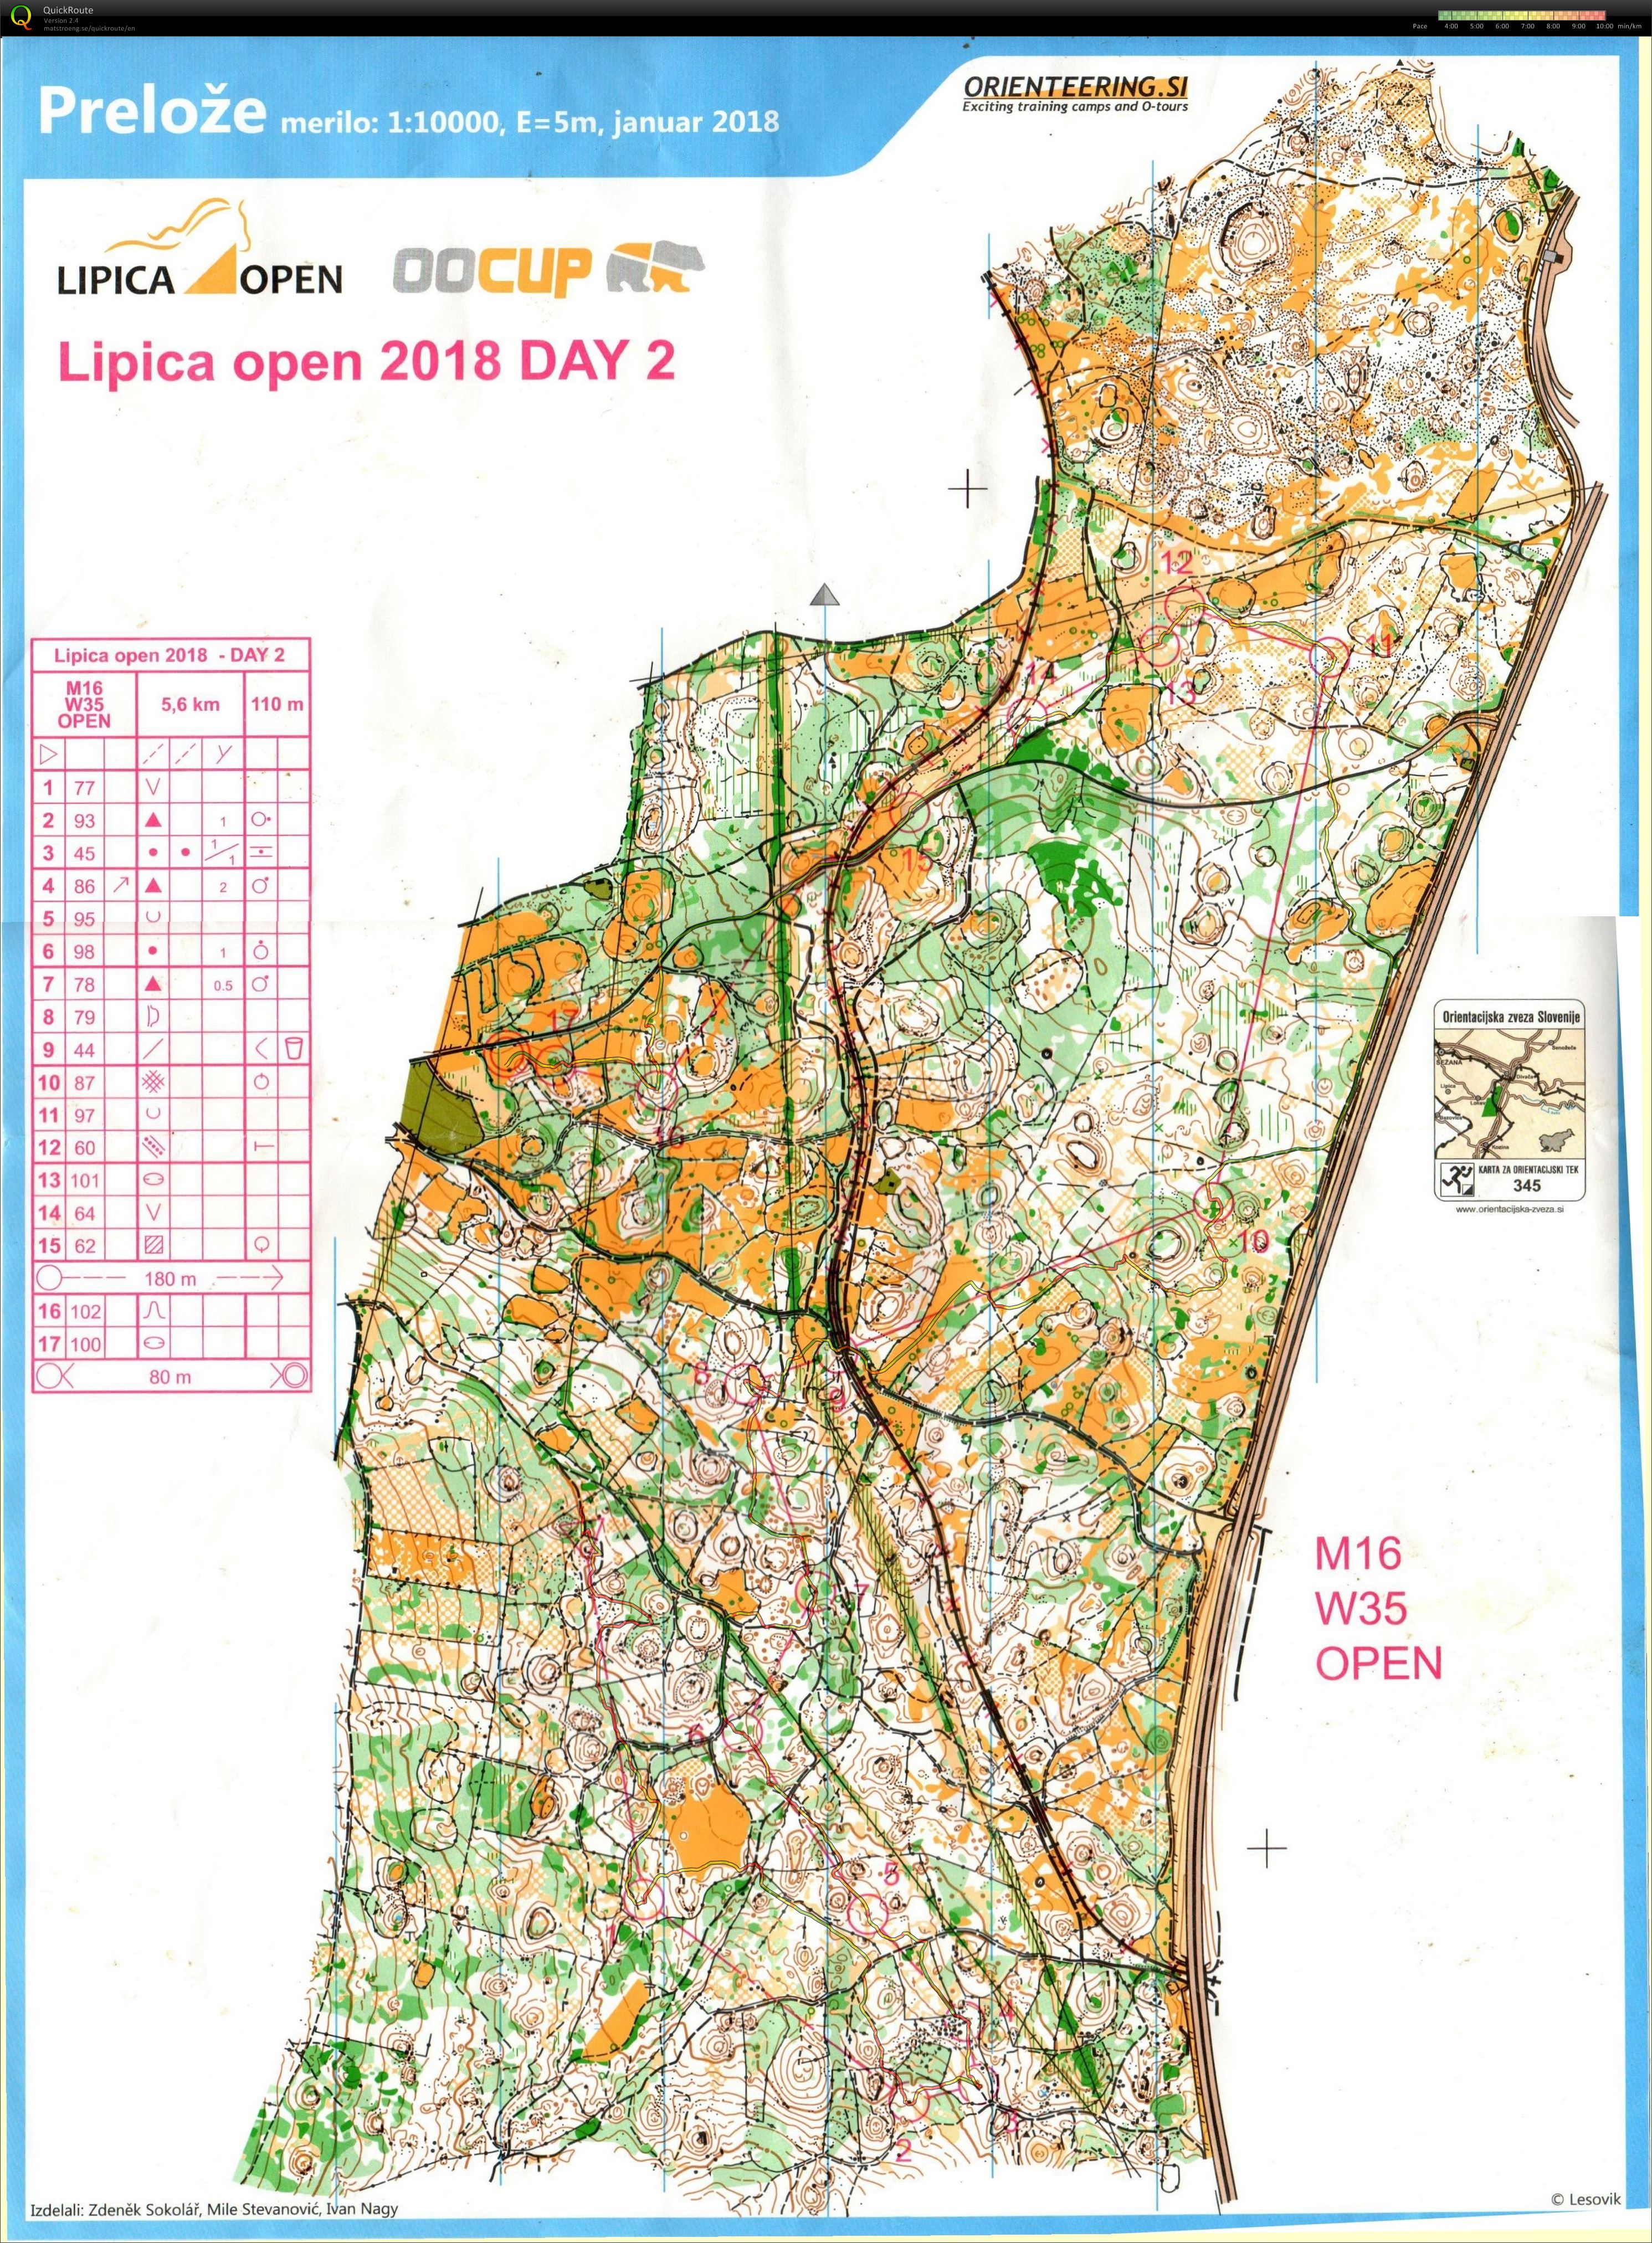 Lipica Open 2018 Day 2 (11/03/2018)